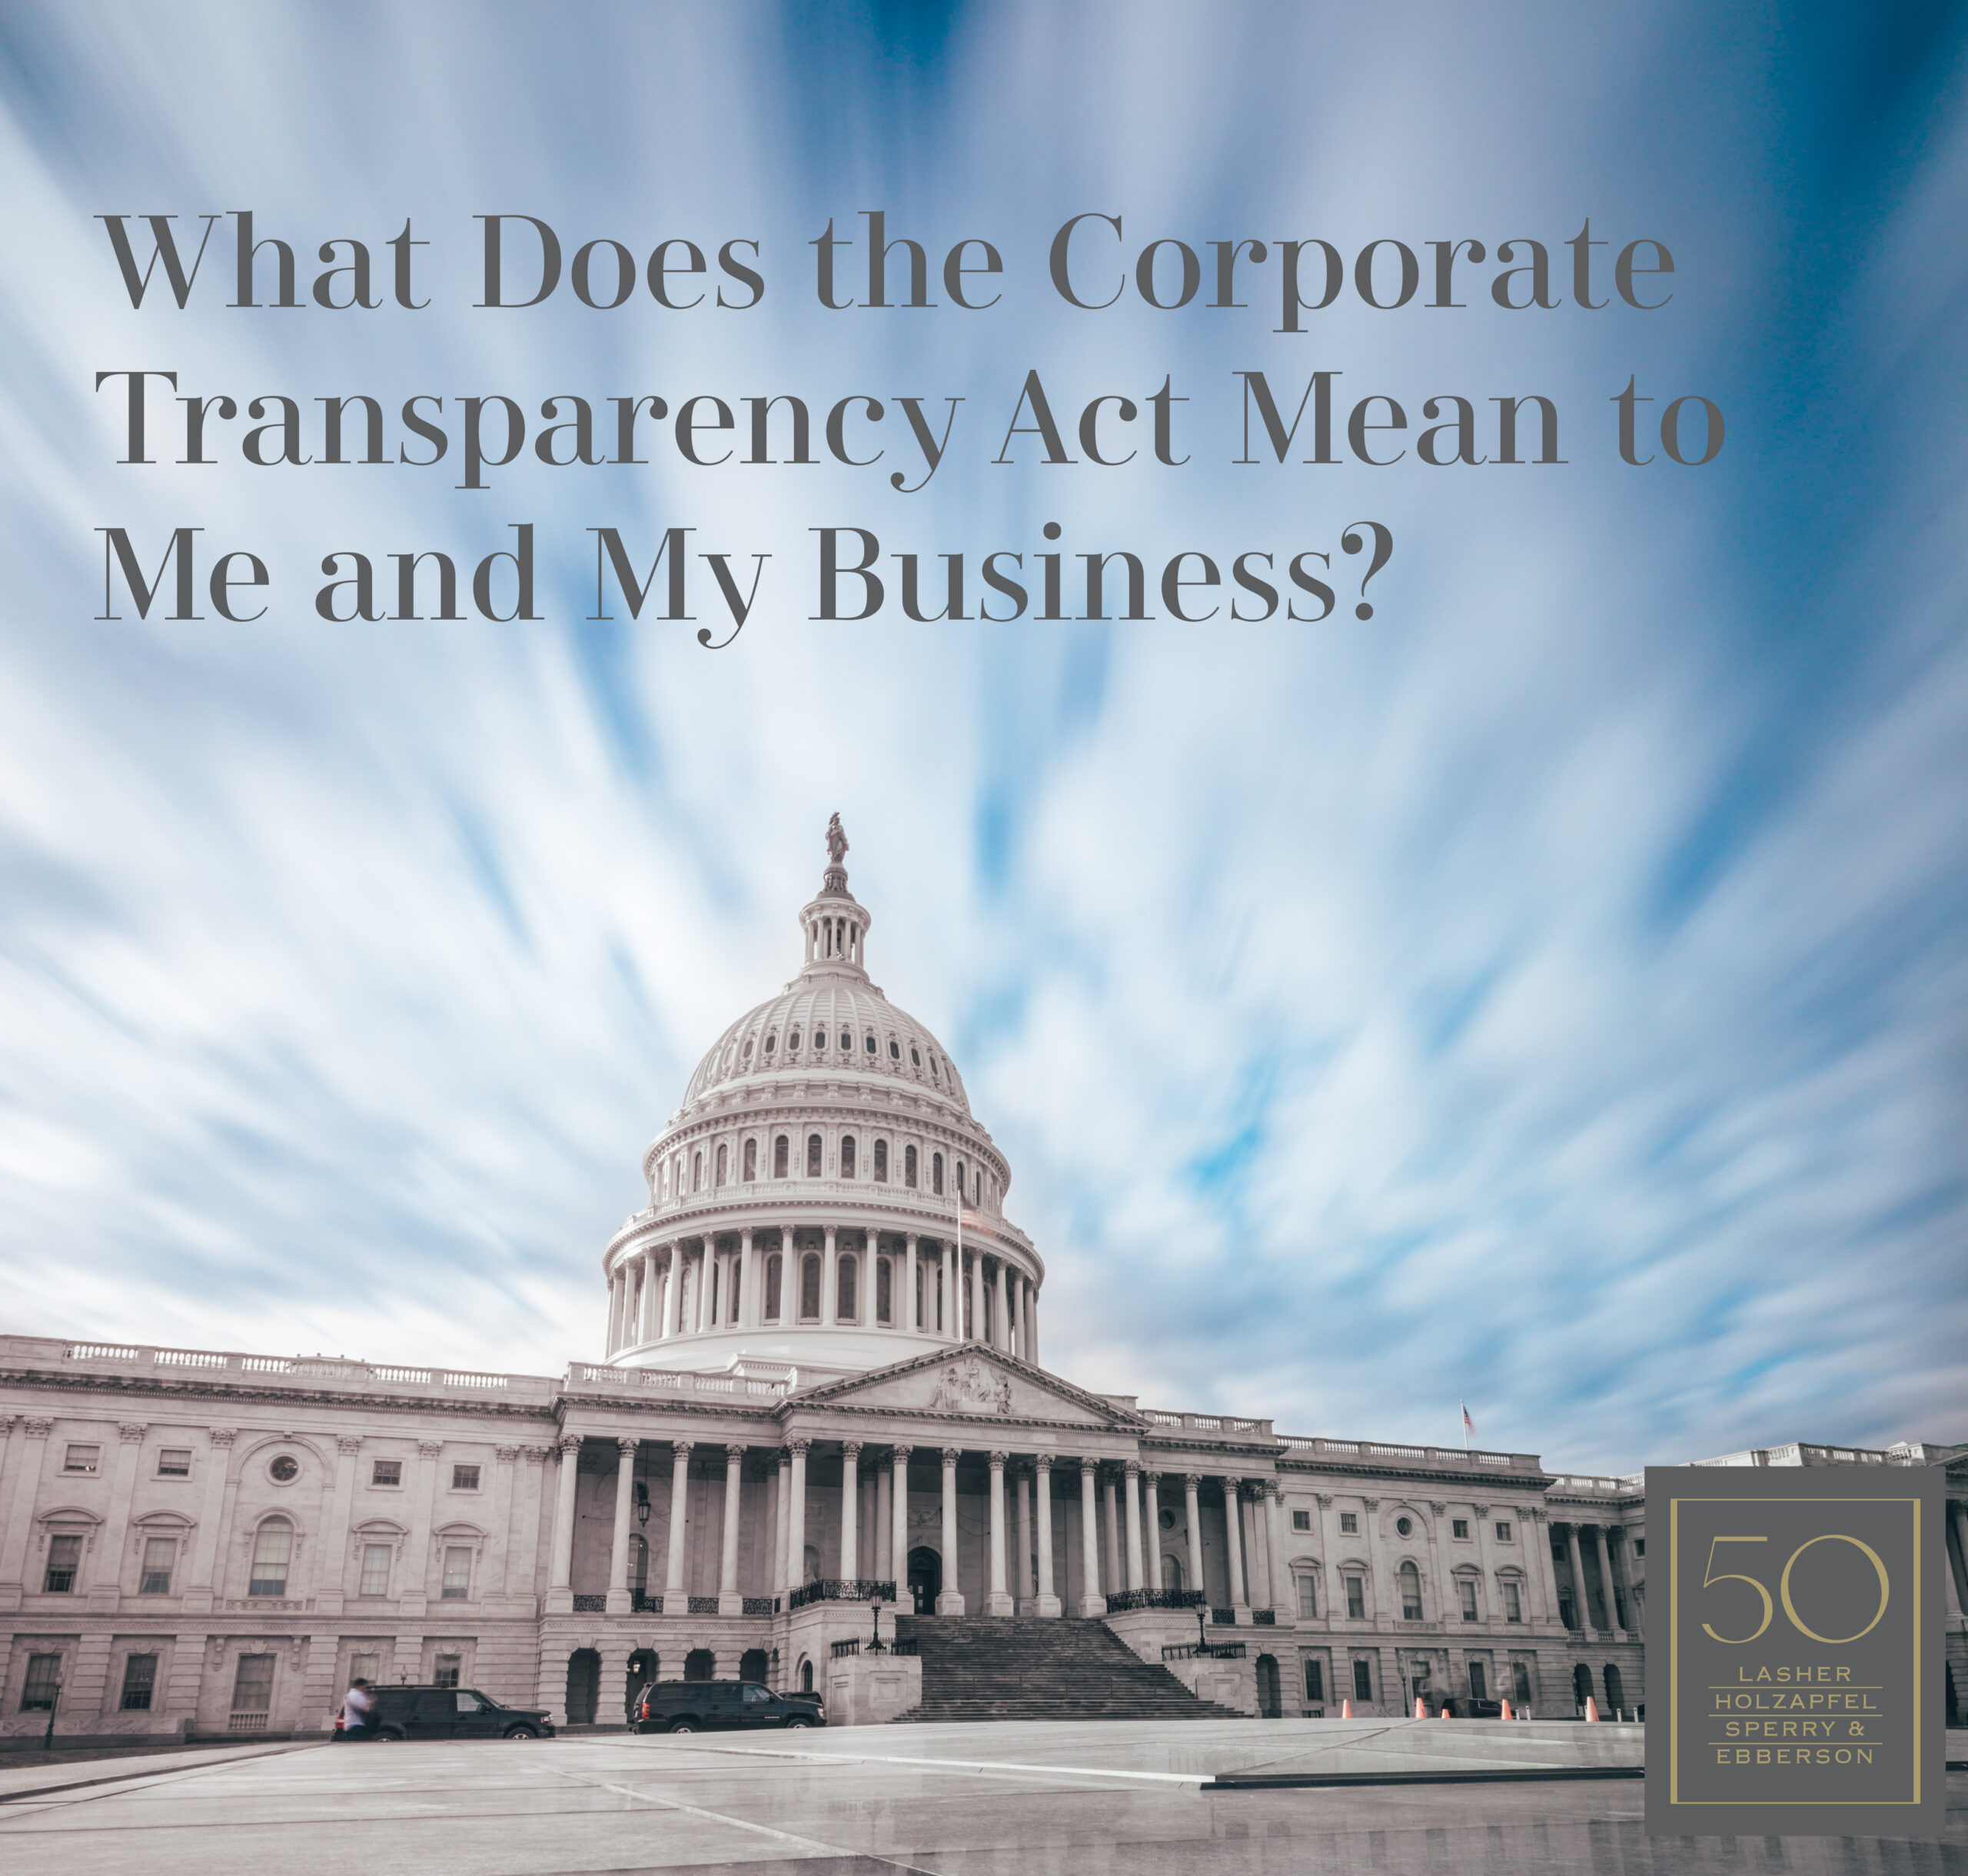 What Does the Corporate Transparency Act Mean to Me and My Business?